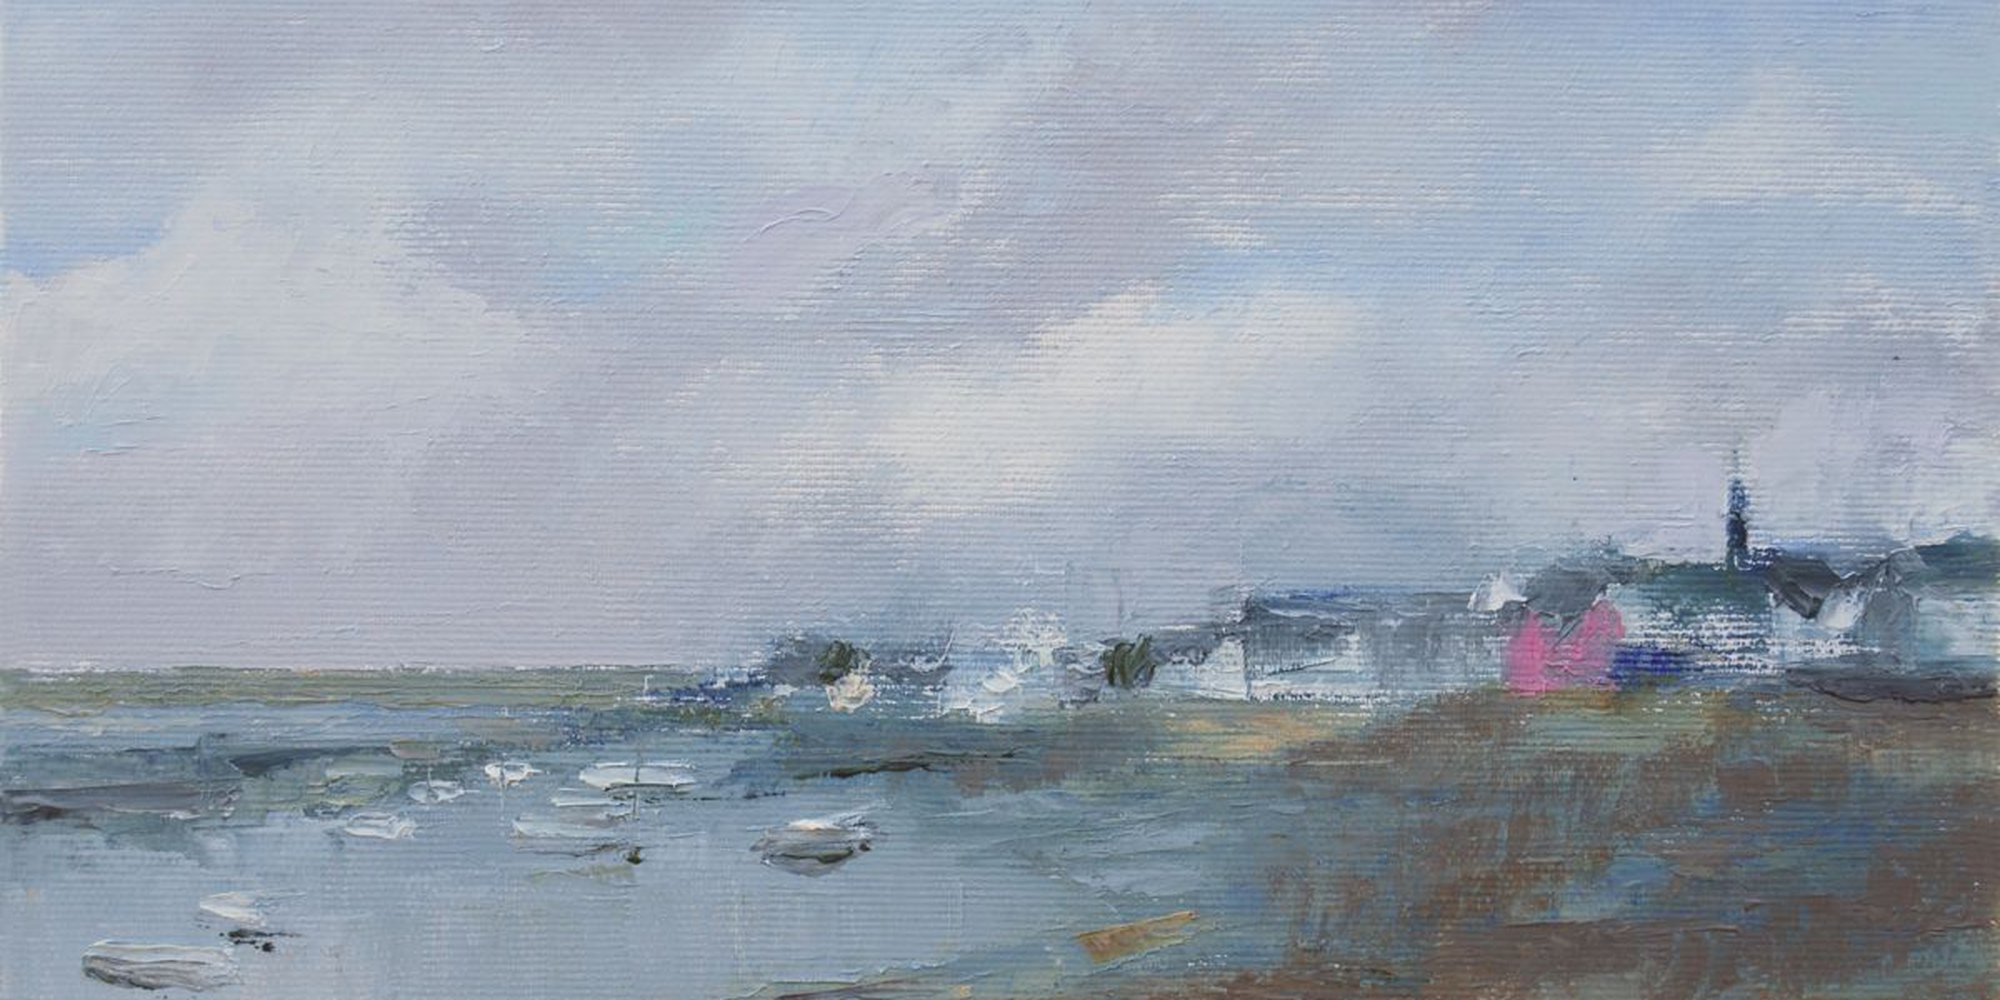 Art of the Day: "Ile-Tudy, Brittany, 2013" by Brian Hanson